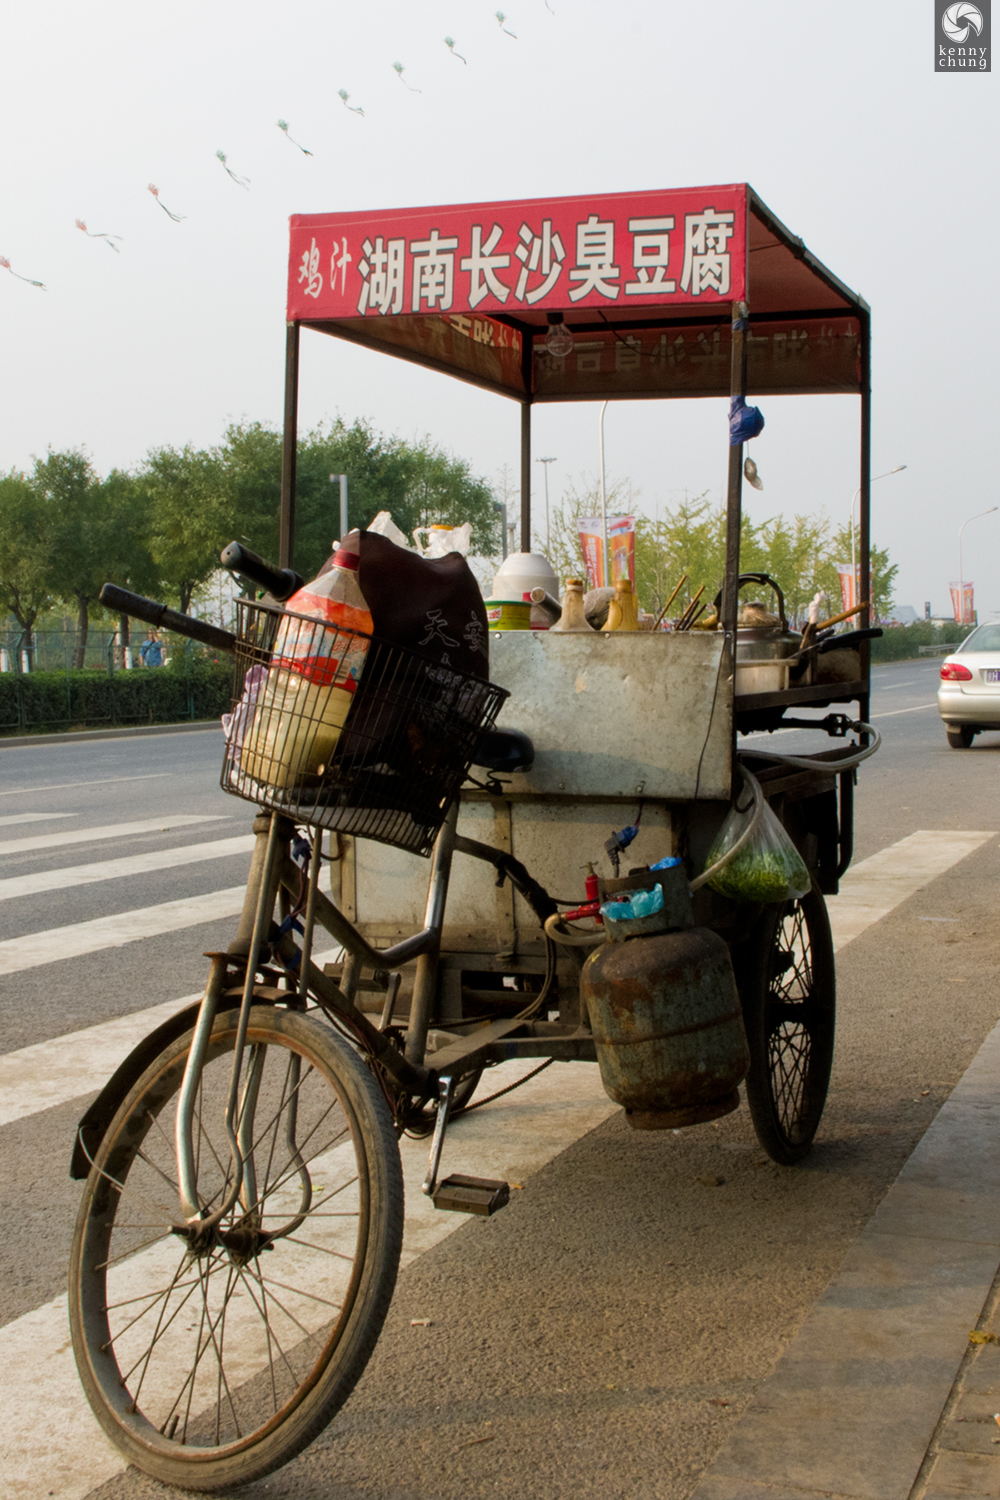 A street food bicycle outside the Beijing Olympic village